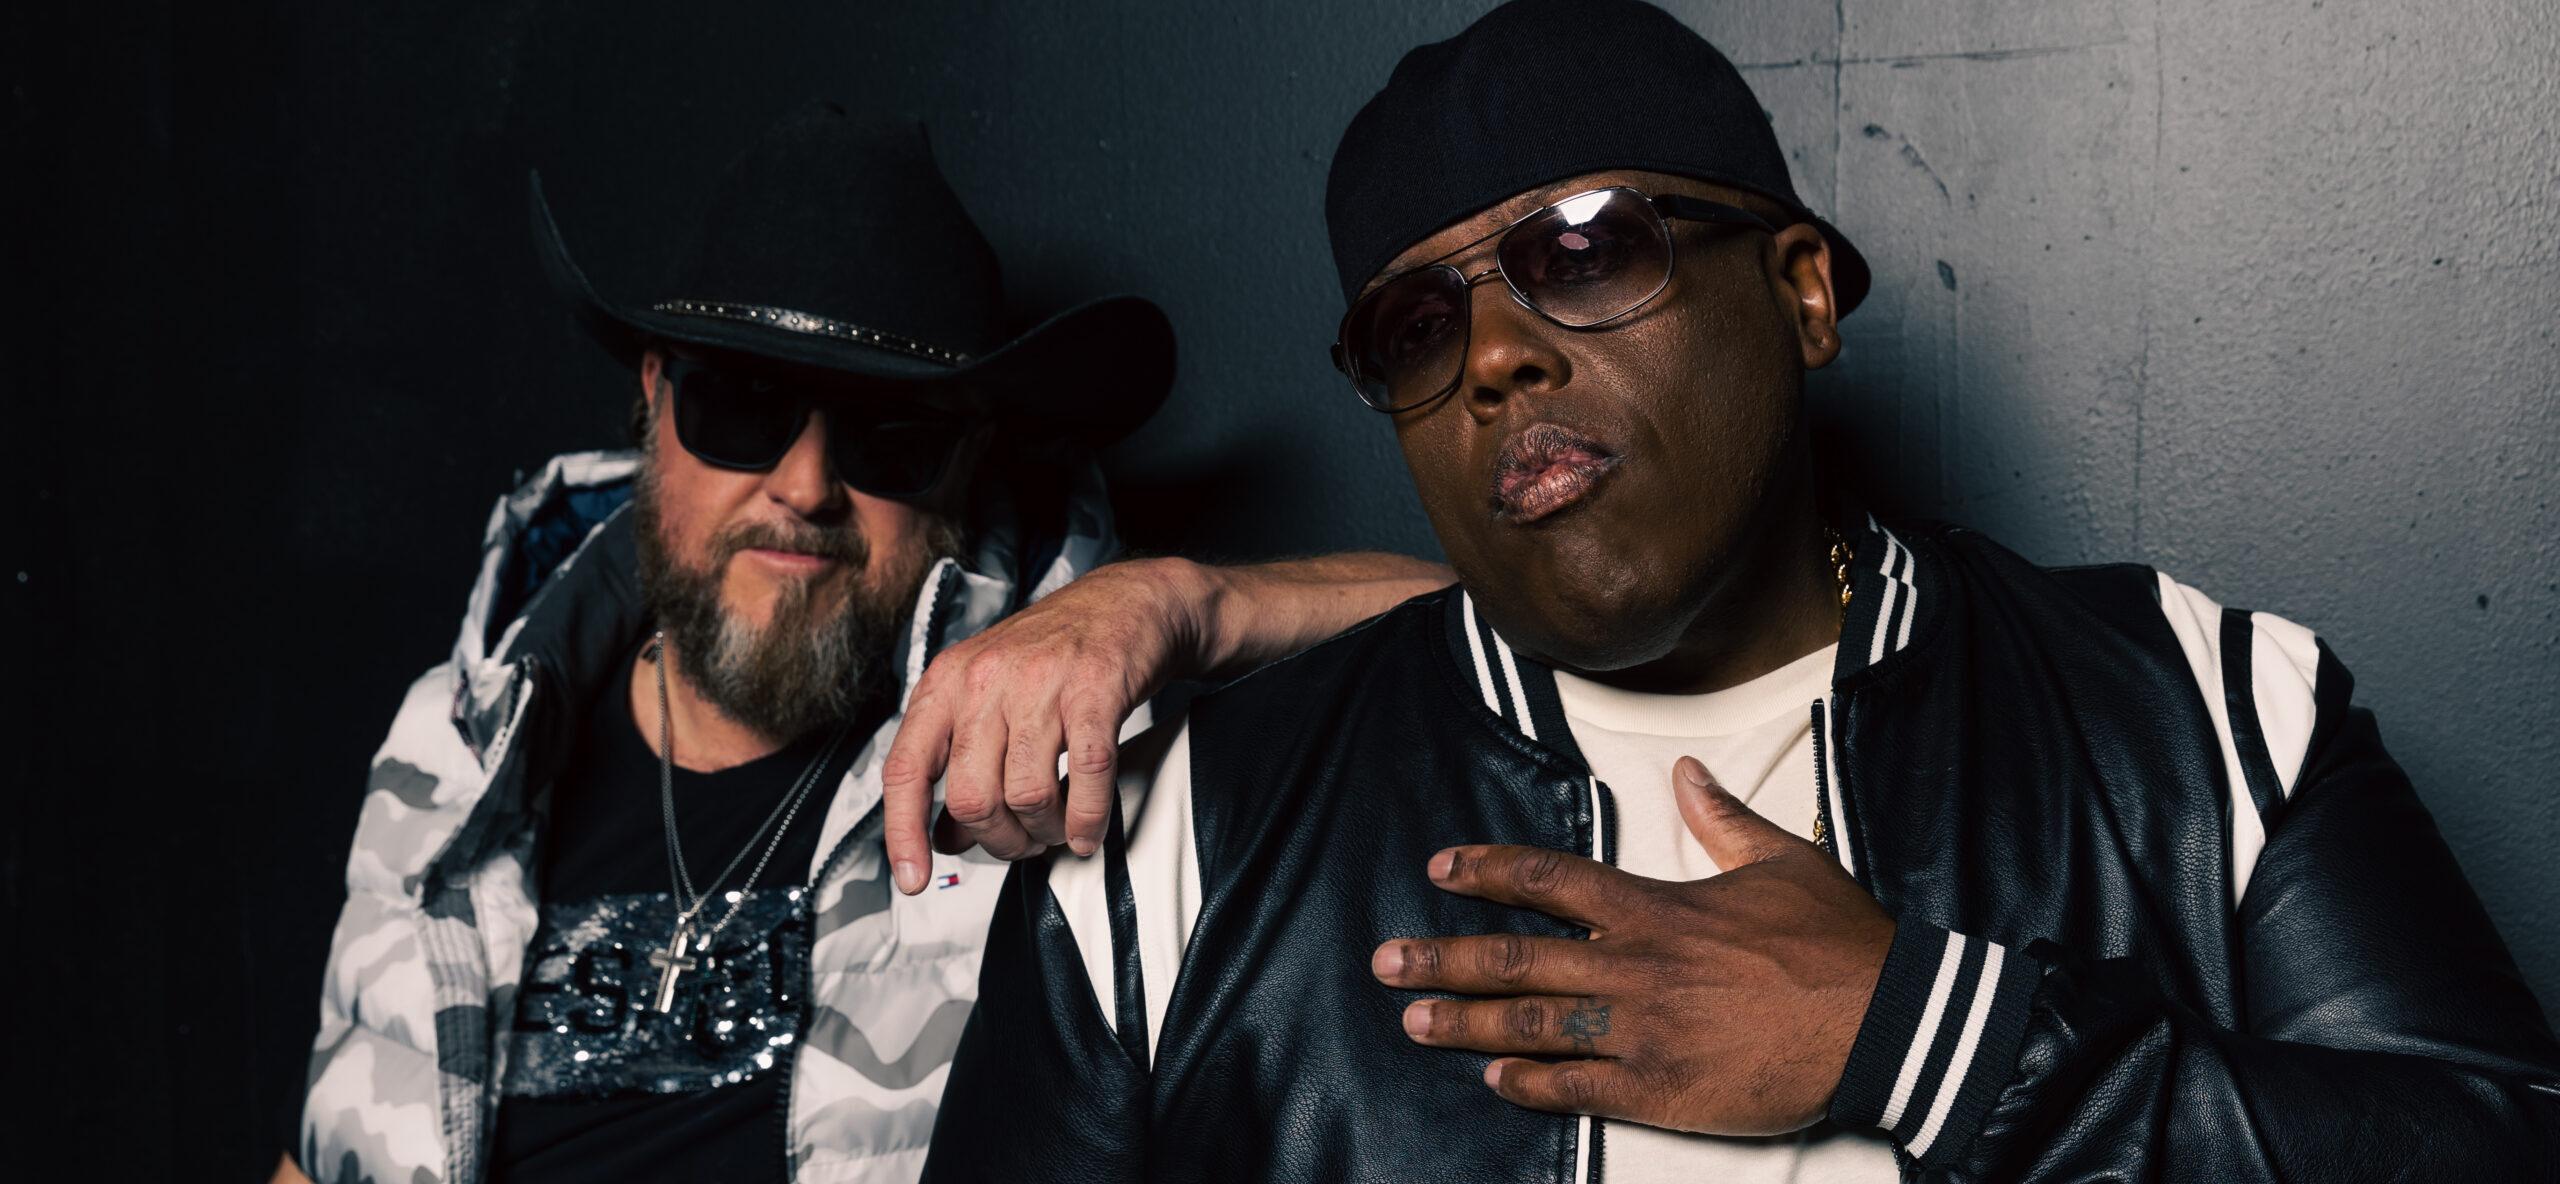 Colt Ford Cancels Tour Dates As He Remains In ICU Following Heart Attack